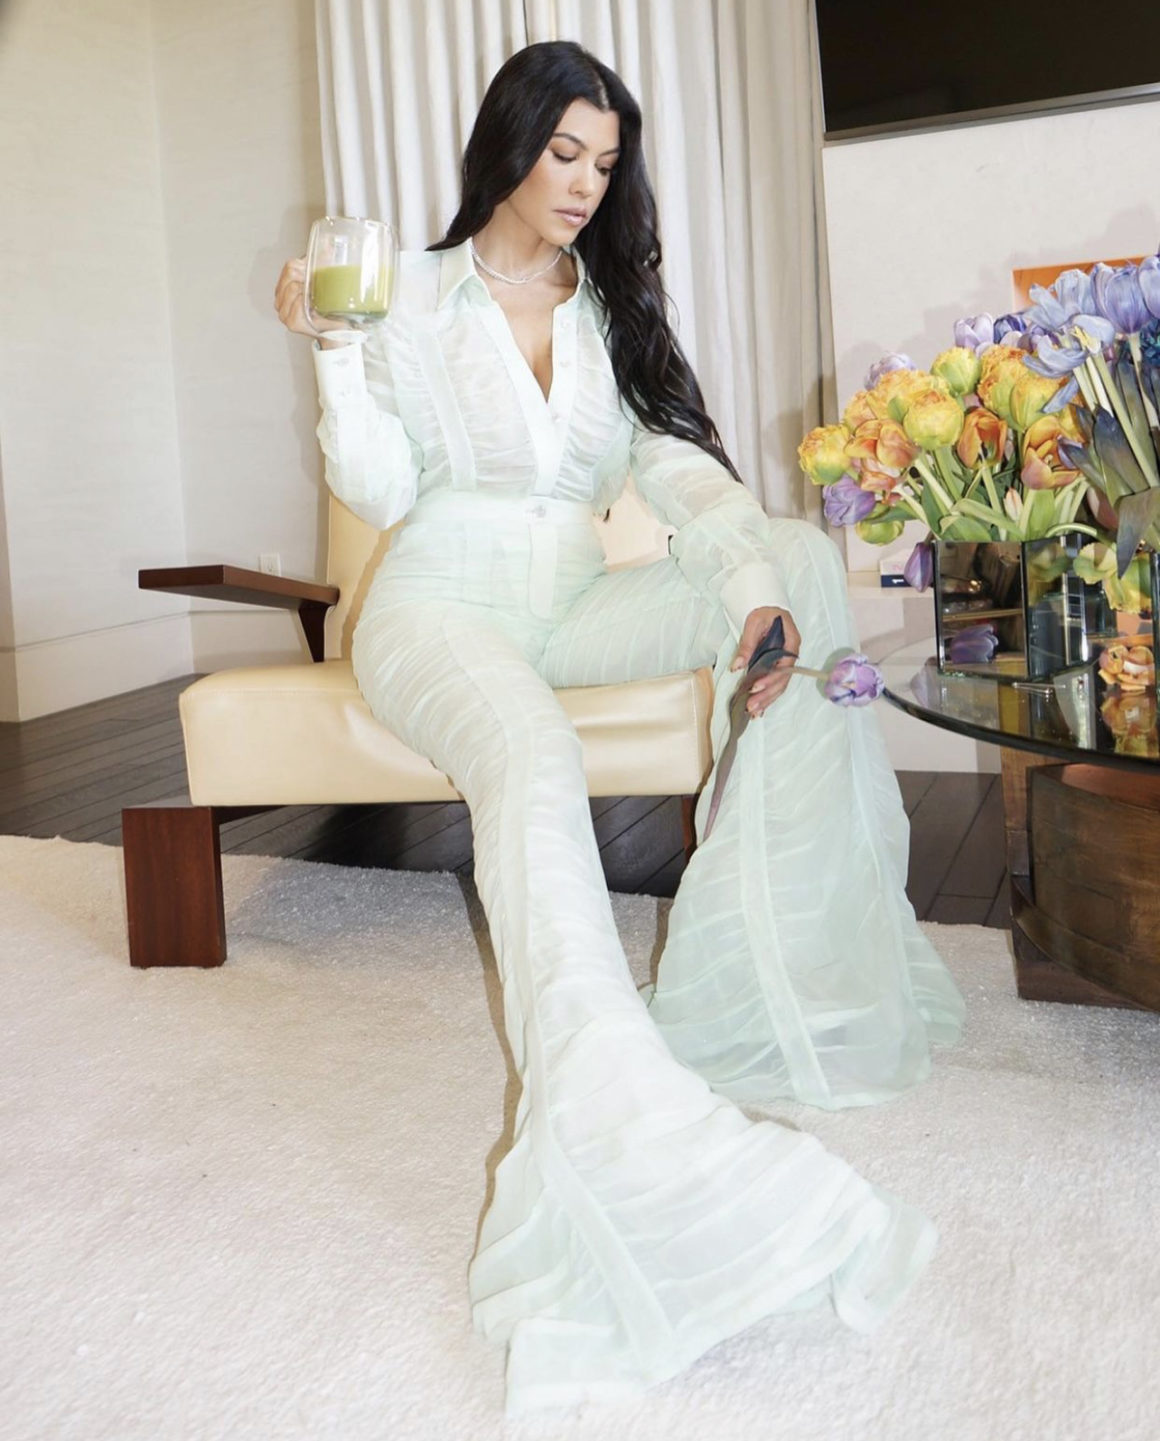 Kourtney Kardashian Promotes Her Poosh Brand Wearing Mint Green Ruched Blouse and Wide Leg Pants by Ferragamo3